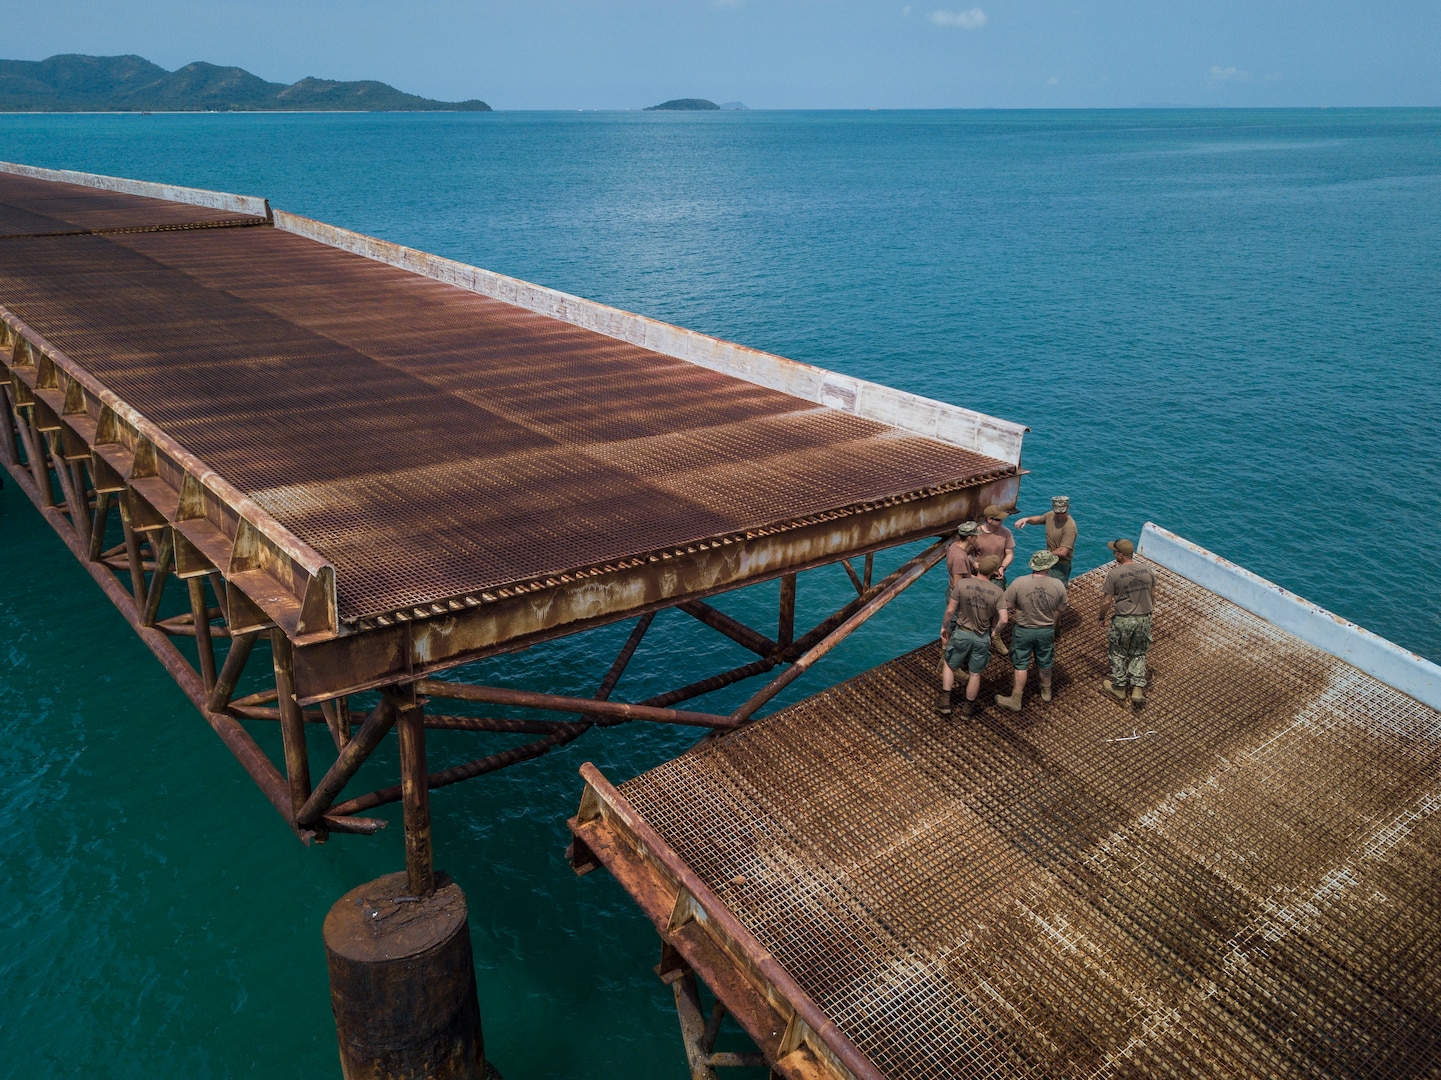 U.S. Navy Sailors assigned to Underwater Construction Team 2 stand on the De Long Pier in Sattahip, Kingdom of Thailand during Exercise Cobra Gold Feb. 20, 2018. Cobra Gold 18 provides a venue for the United States, allied and partner nations to advance interoperability and increase partner capacity in planning and executing complex and realistic multinational force and combined task force operations.